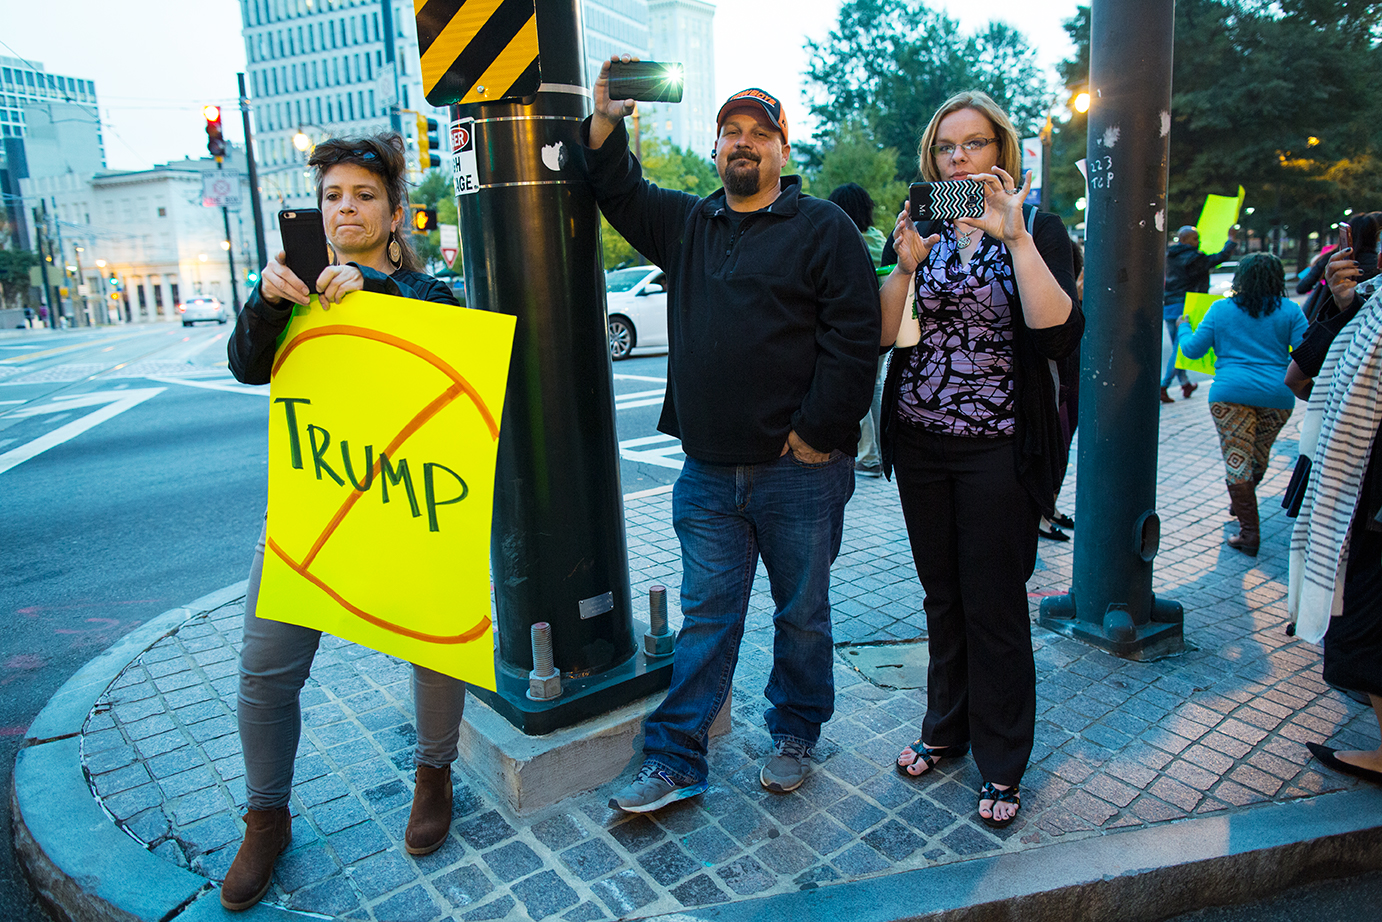  Anti-Trump protester and bystanders photograph march held during the Facing Race 2016 conference against president-elect Donald Trump, who gave voice to  bigotry  and  encouraged violence  during his campaign. Atlanta, GA, 10 November   